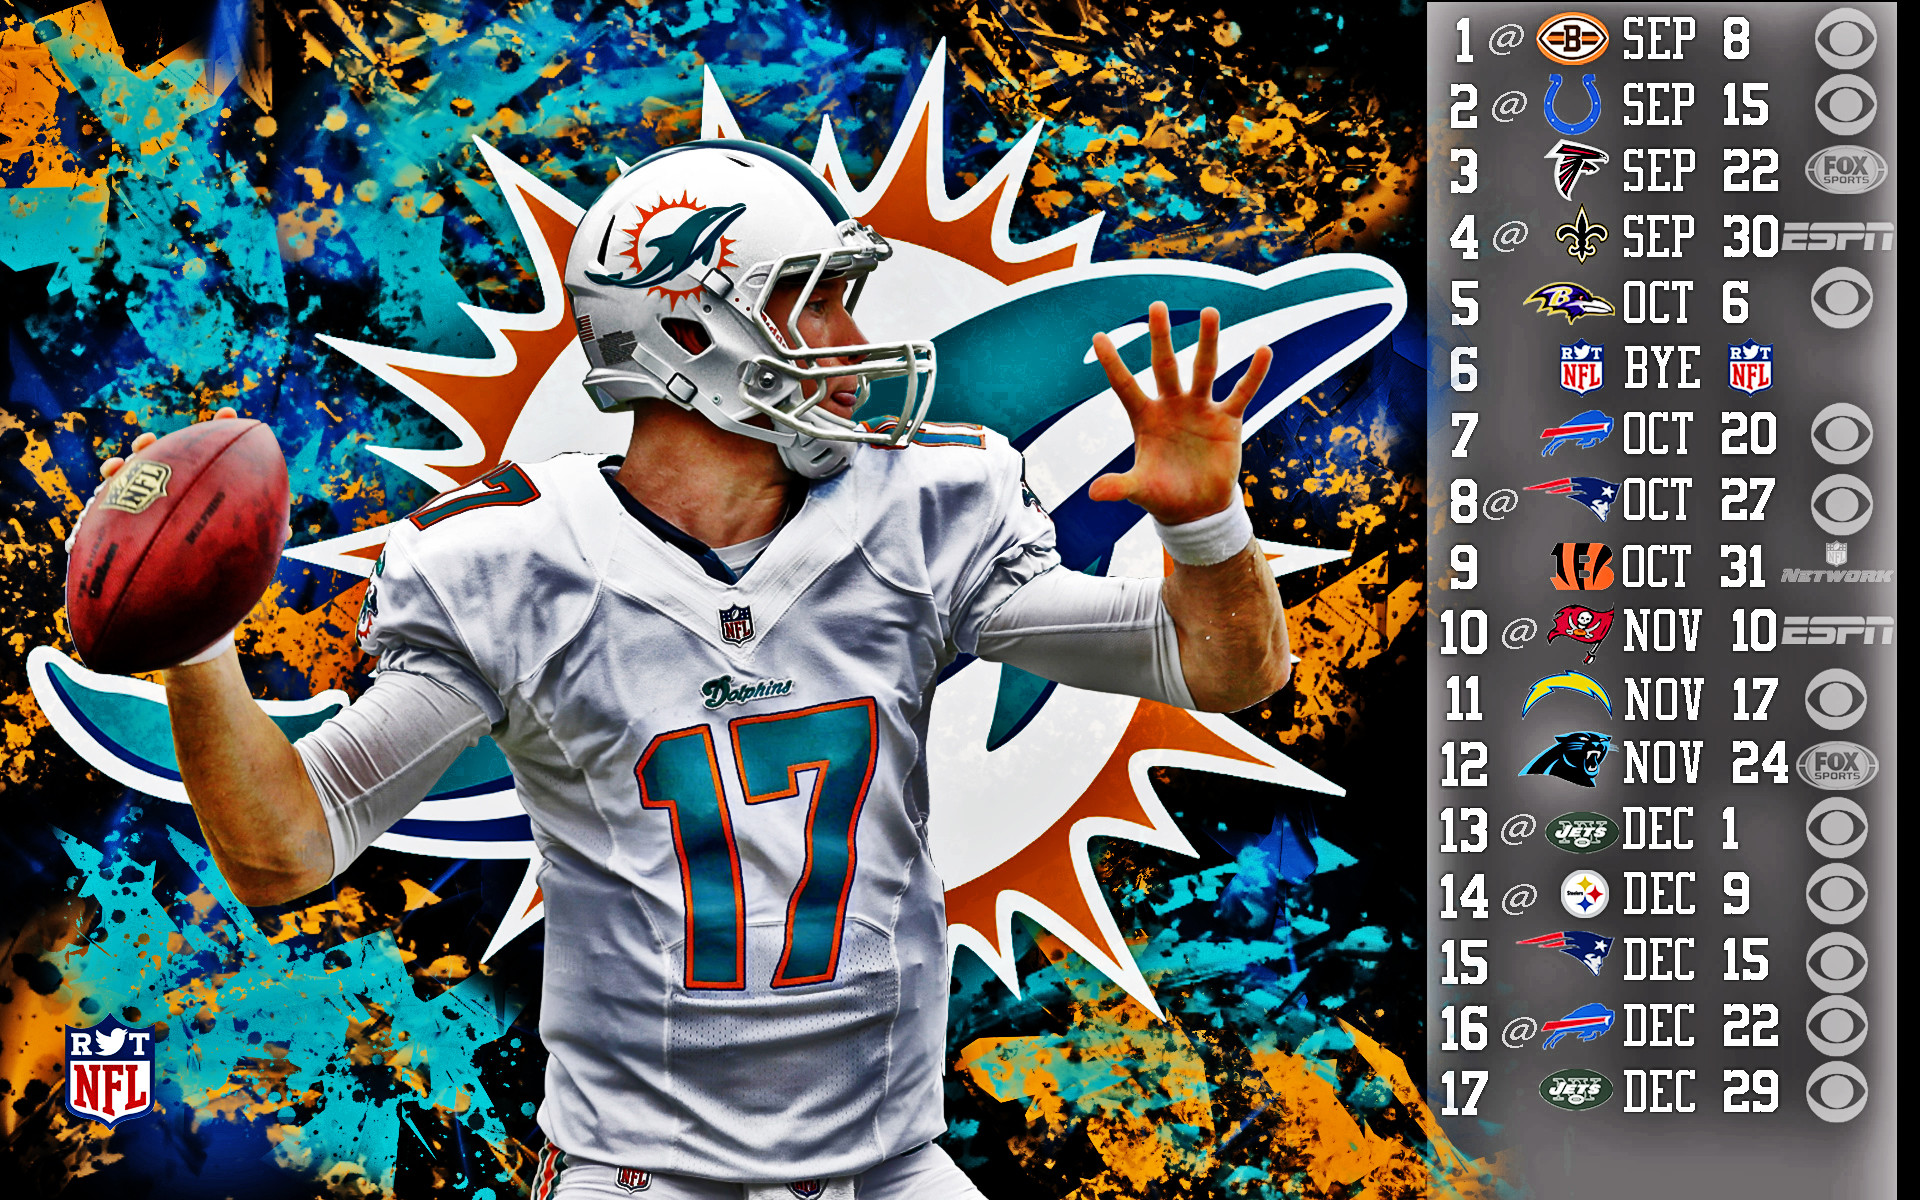 1920x1200 MIAMI DOLPHINS SCHEDULE 2013 images and photo galleries - fameimages .